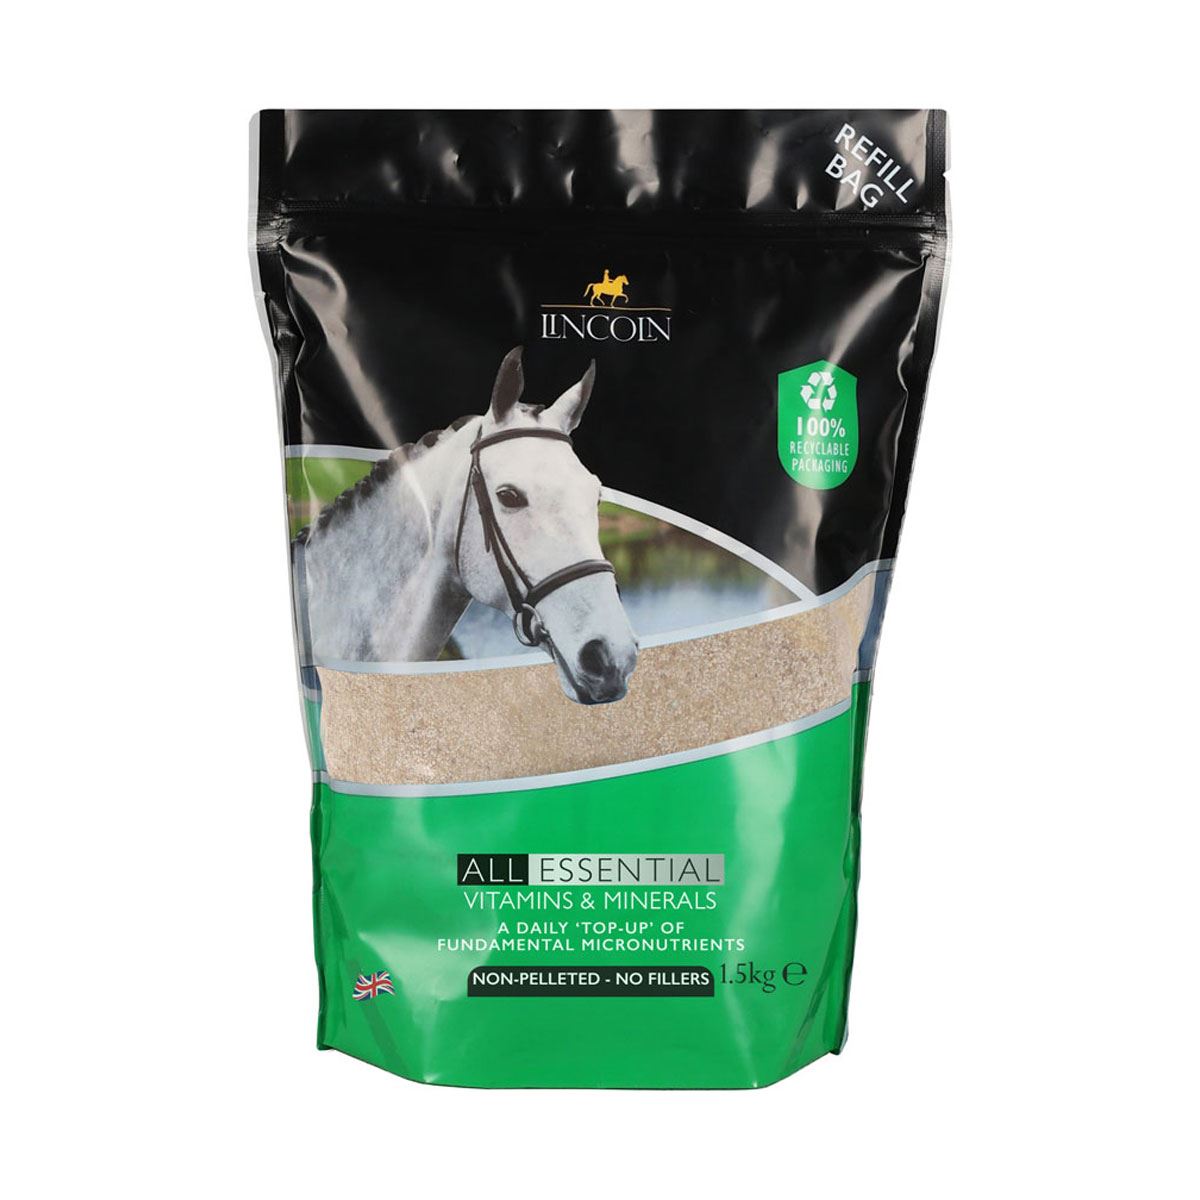 Lincoln All Essential Vitamins & Minerals Refill Pouch - Just Horse Riders